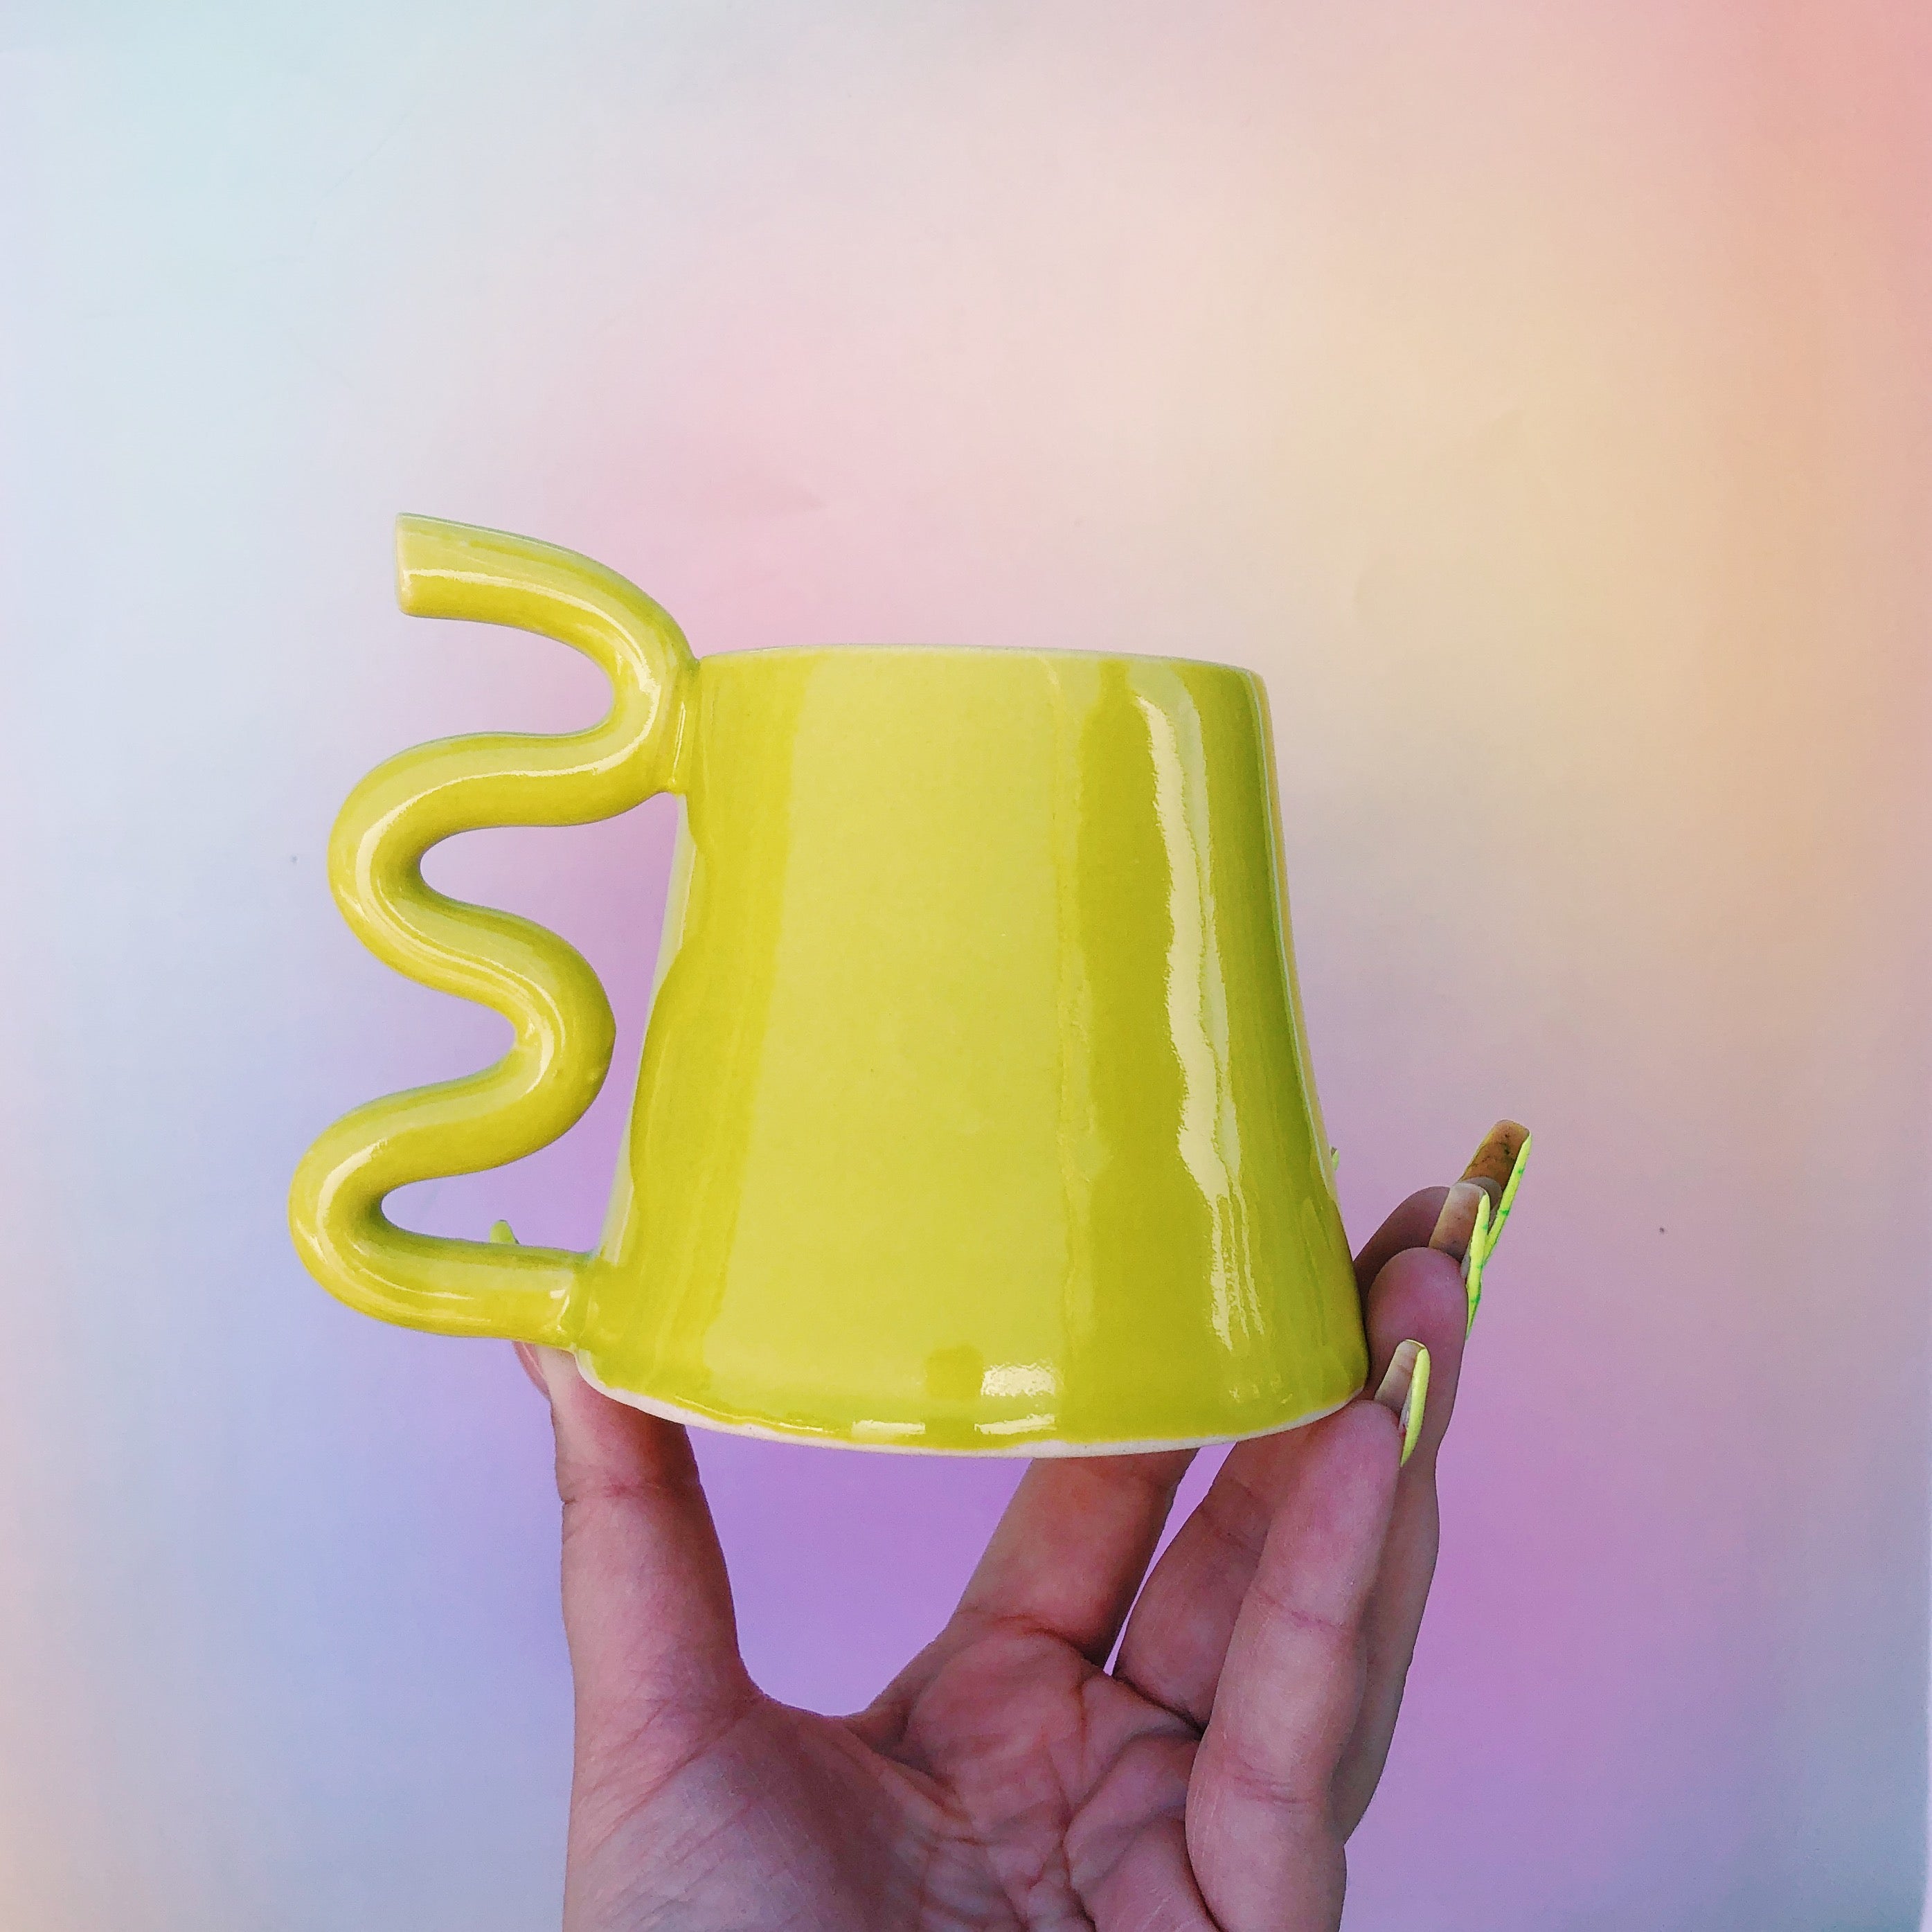 *SECOND* CHARTREUSE SQUIGGLE MUG *NOT FOR DRINKING*